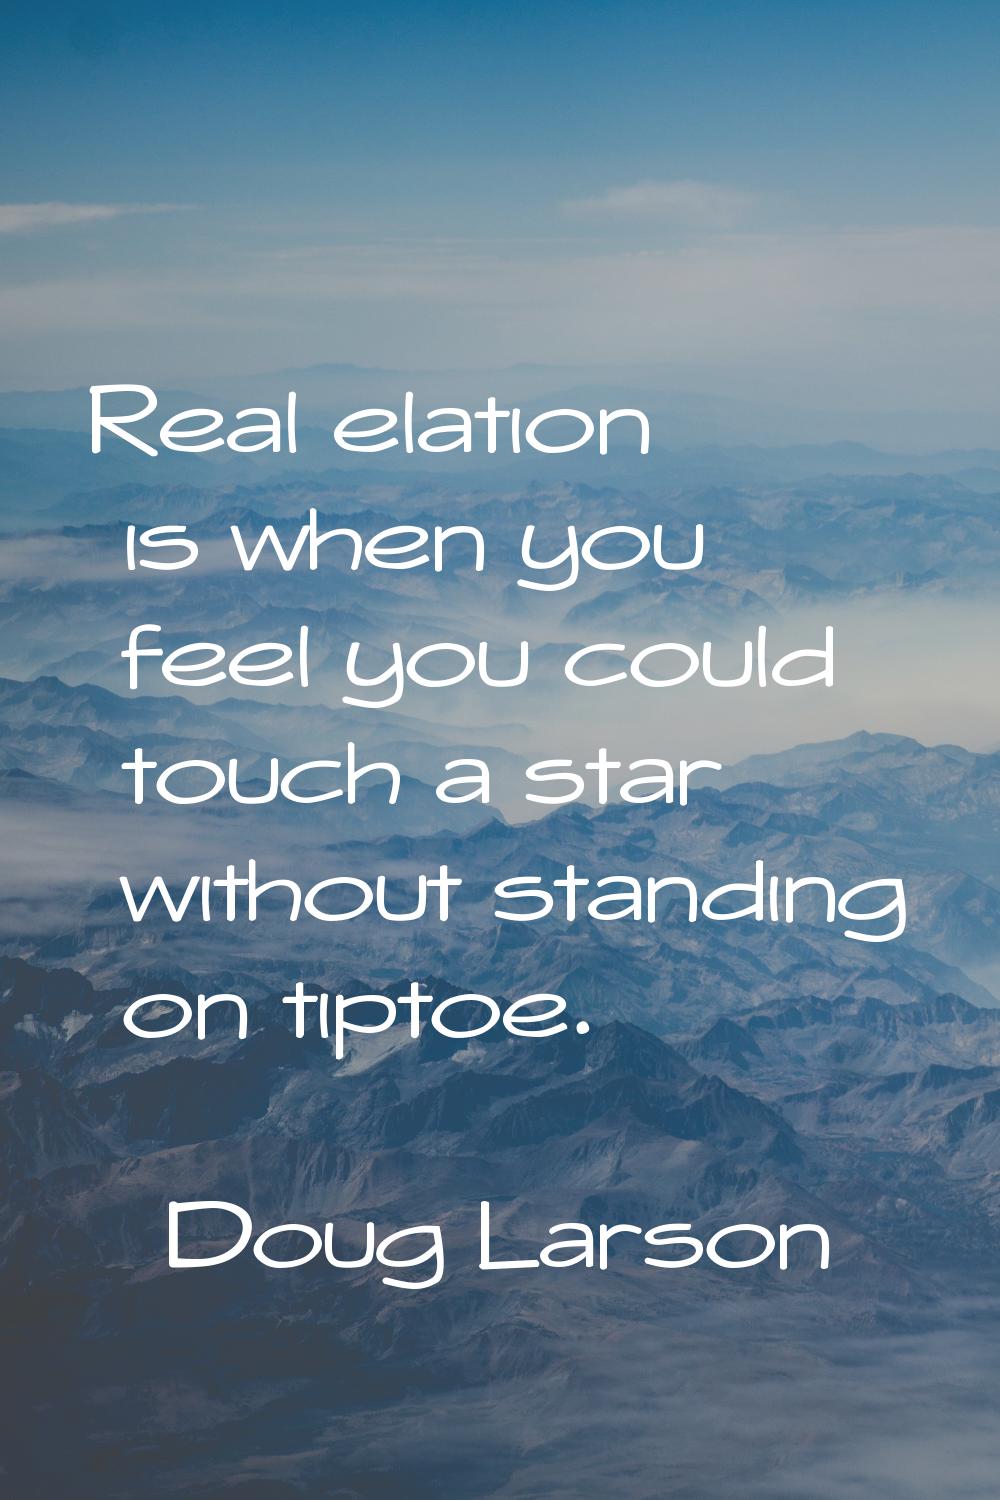 Real elation is when you feel you could touch a star without standing on tiptoe.